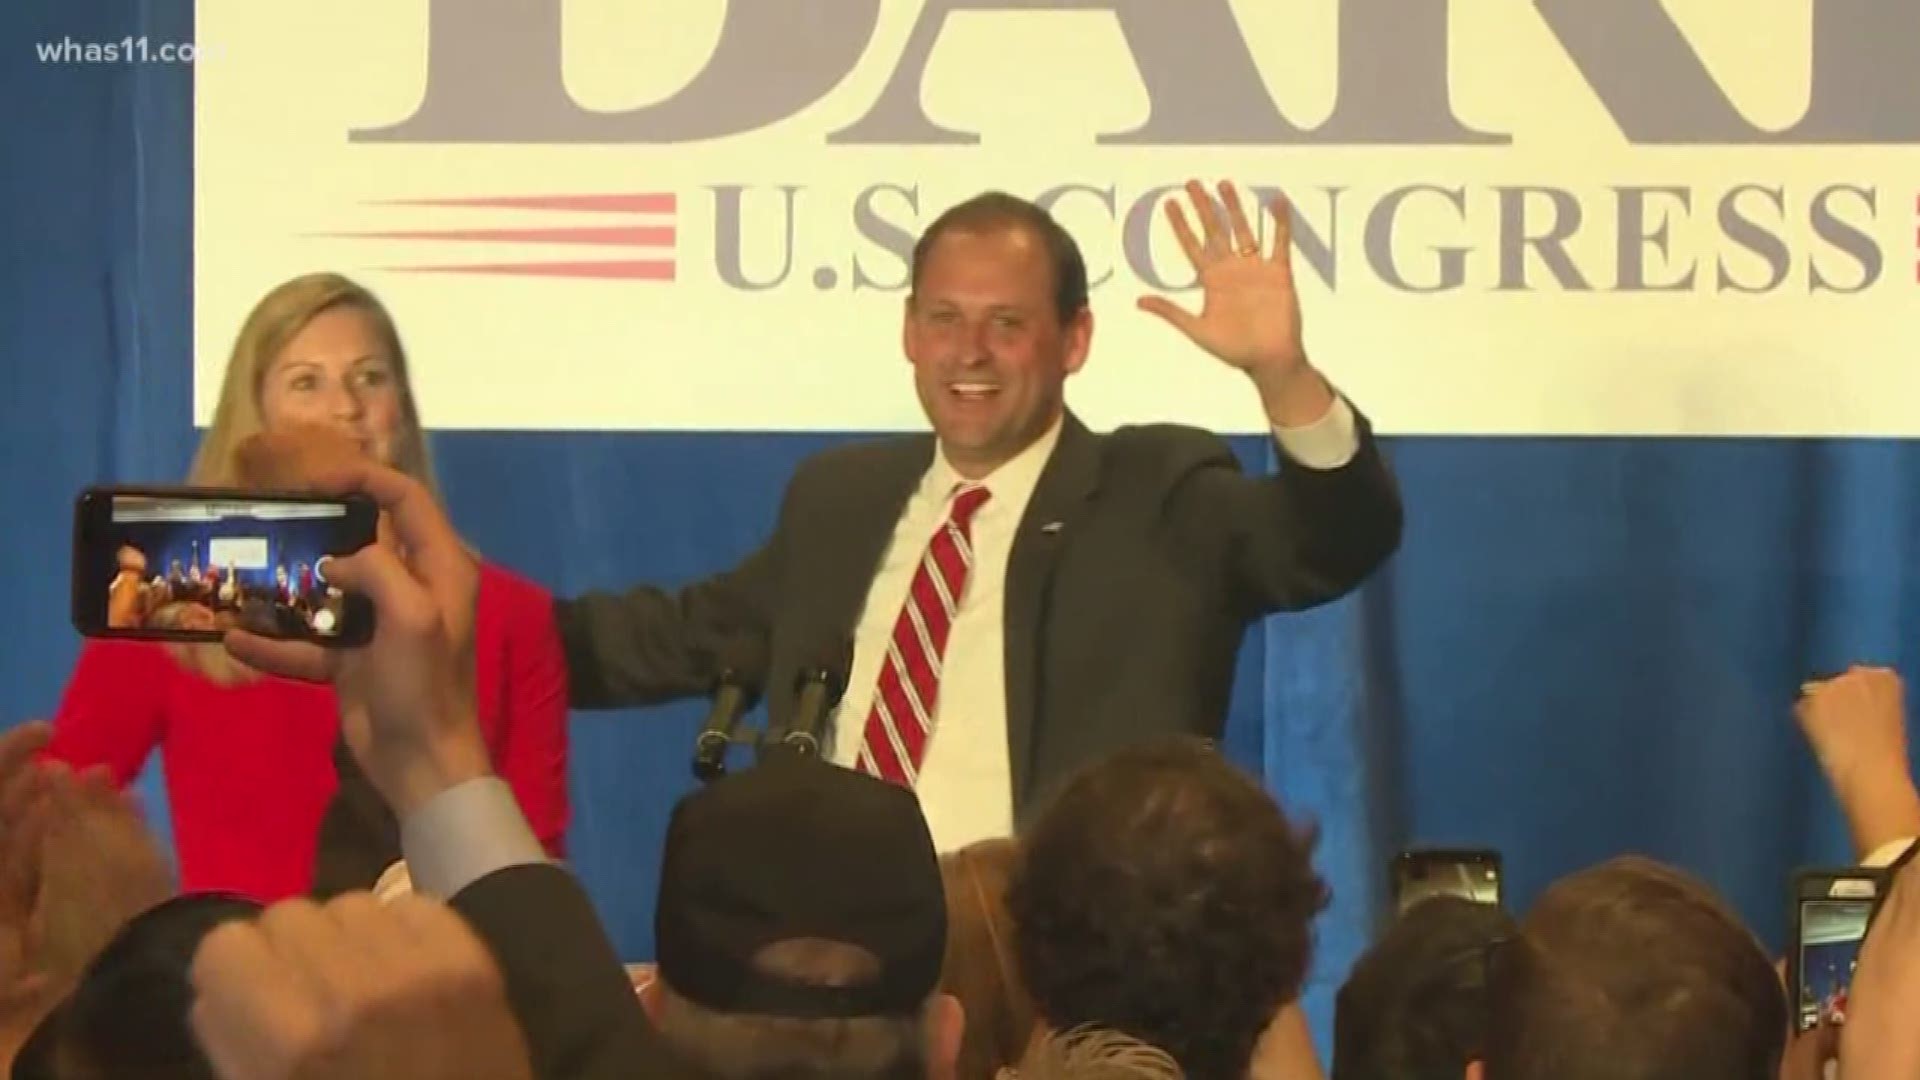 Representative Andy Barr spent about 15 minutes thanking his family, his staff and his supporters - the word coming to mind, he says, was gratitude.